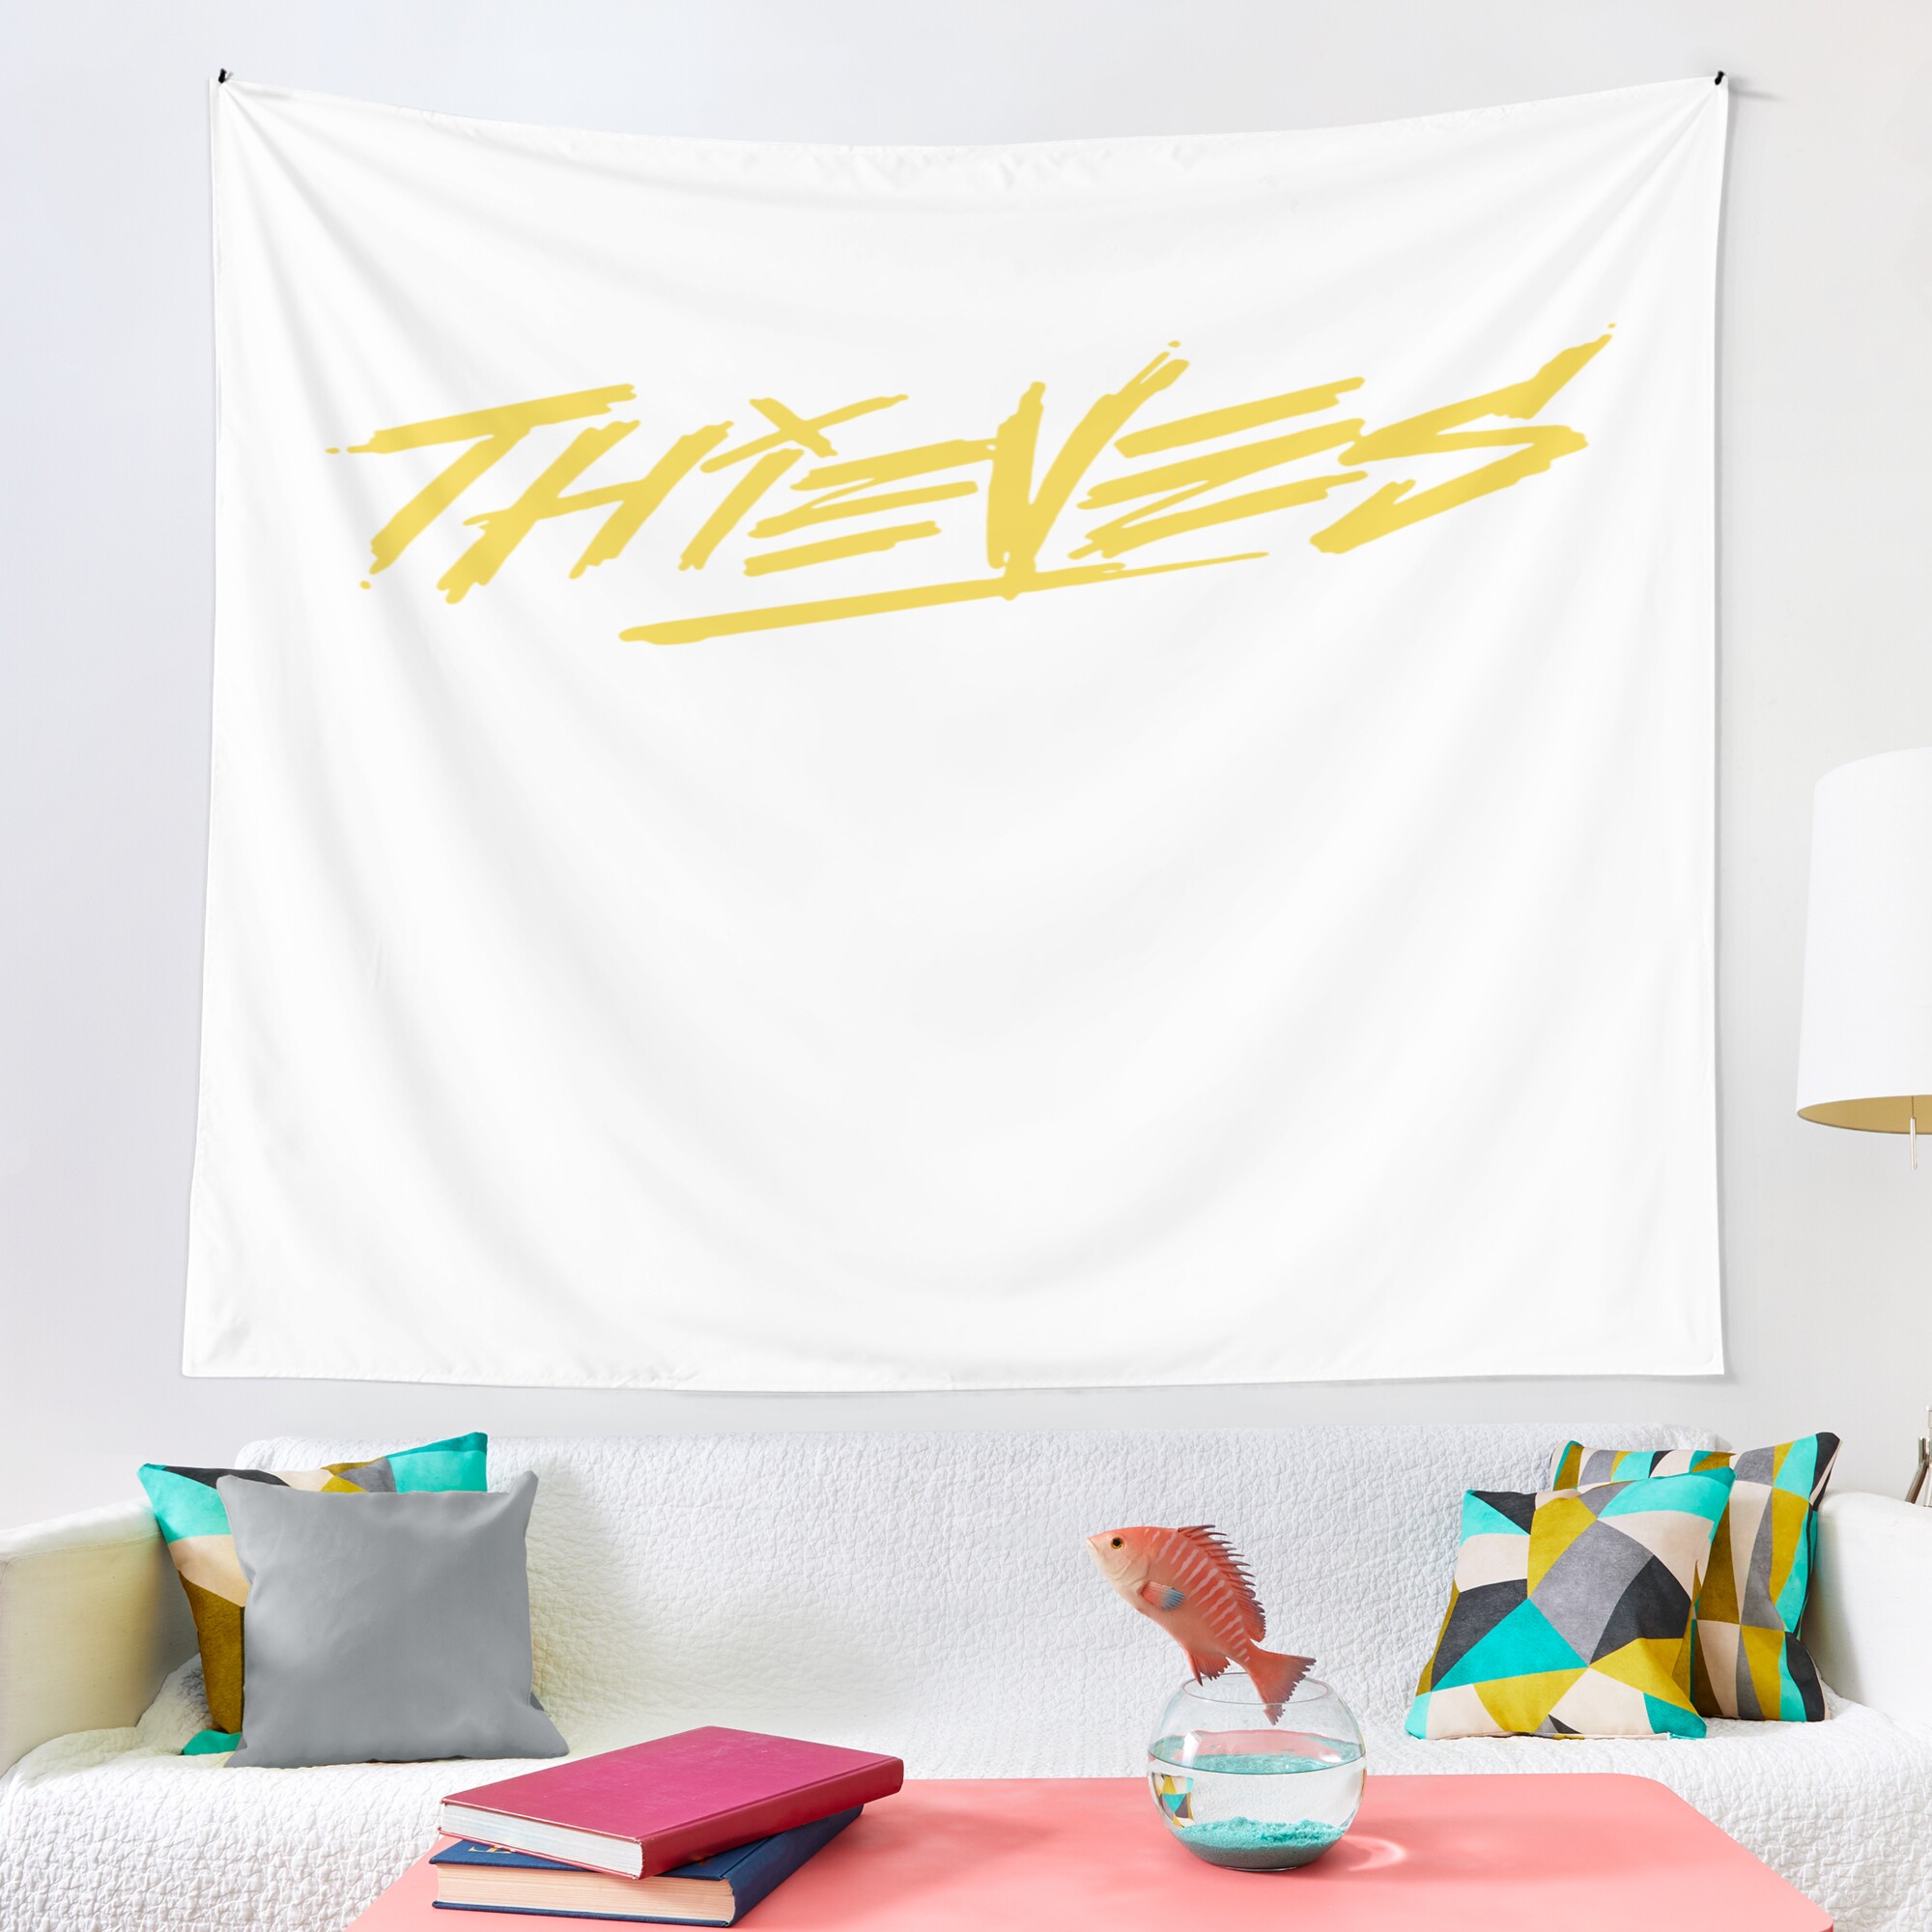 urtapestry lifestyle largesquare2000x2000 4 - 100 Thieves Shop